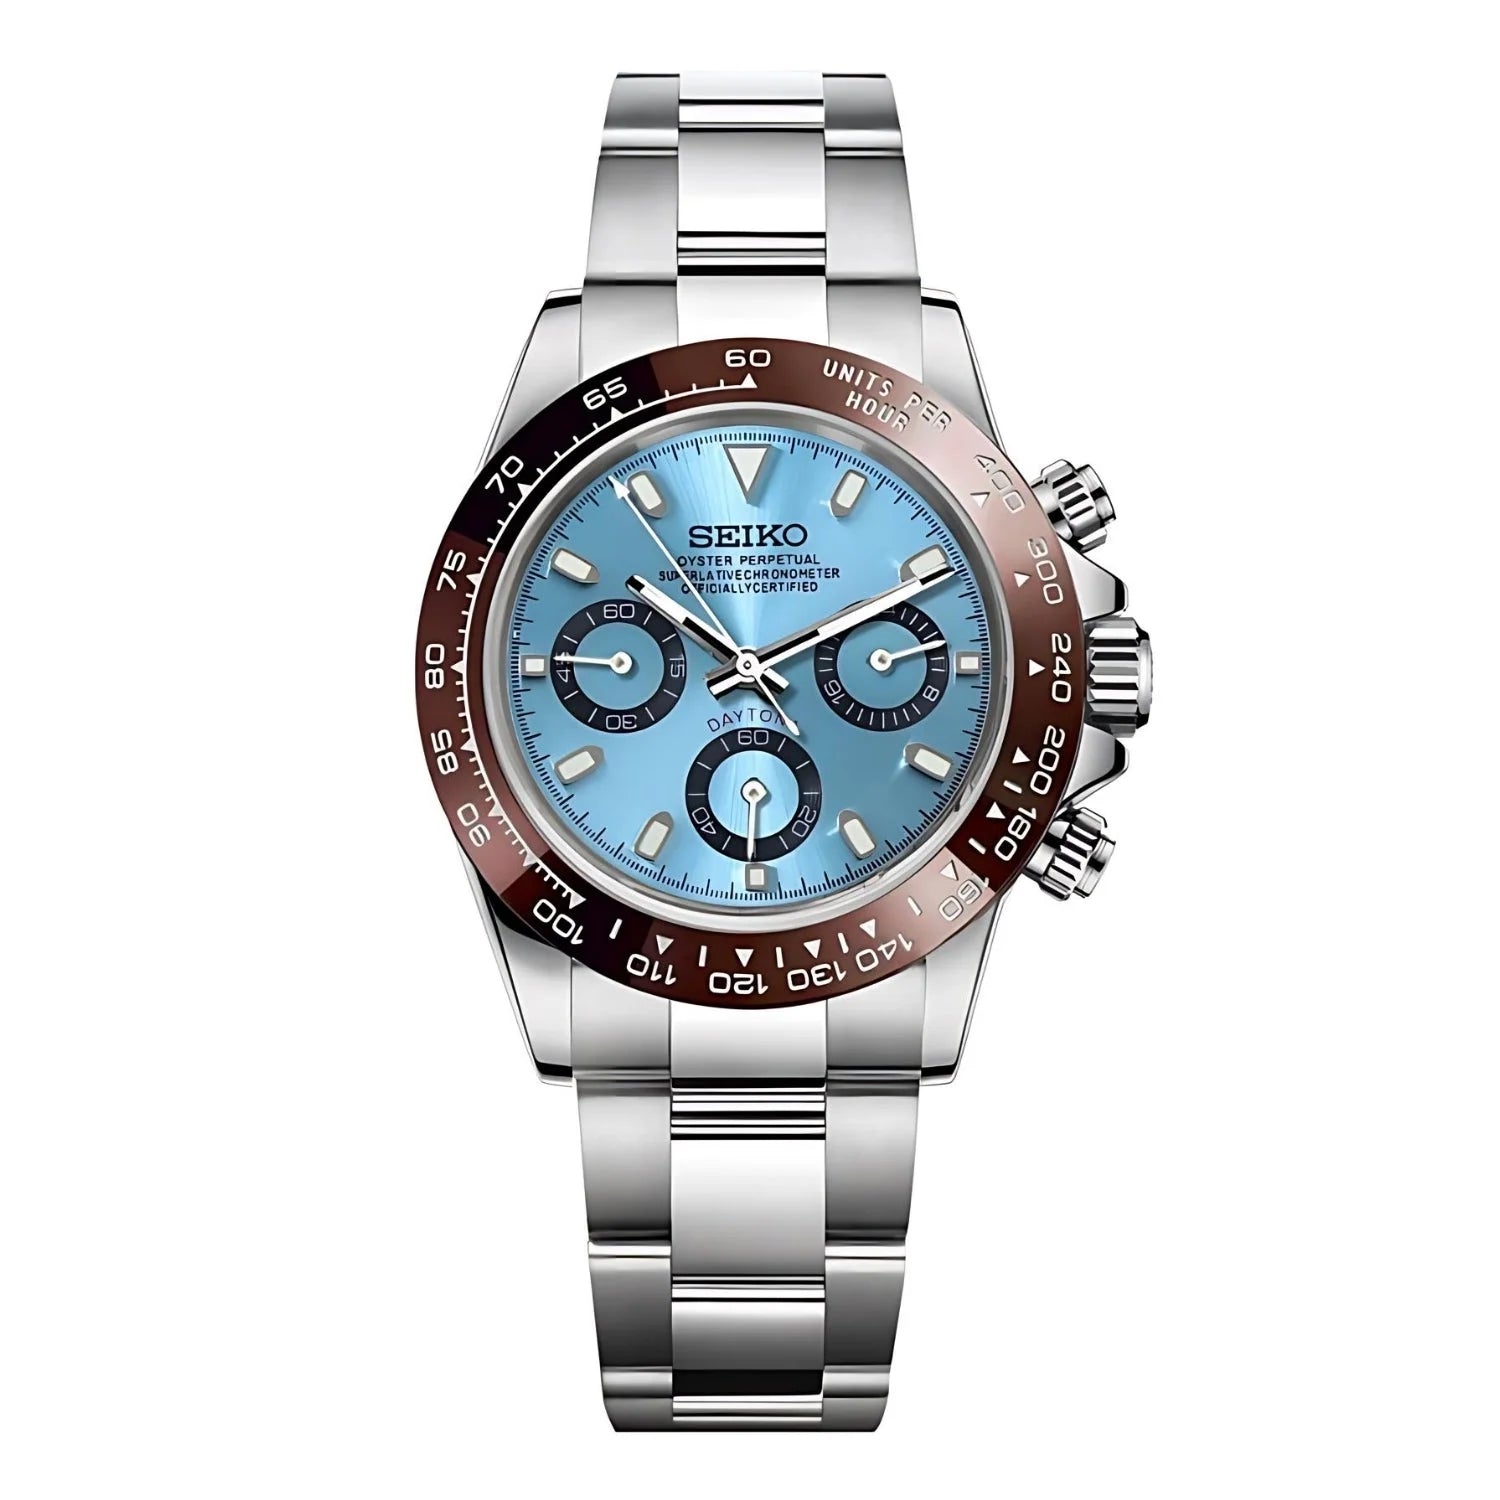 Seiko Vk63 Hybrid Wristwatch With Light Blue Dial, Brown Bezel, 904l Stainless Steel Case